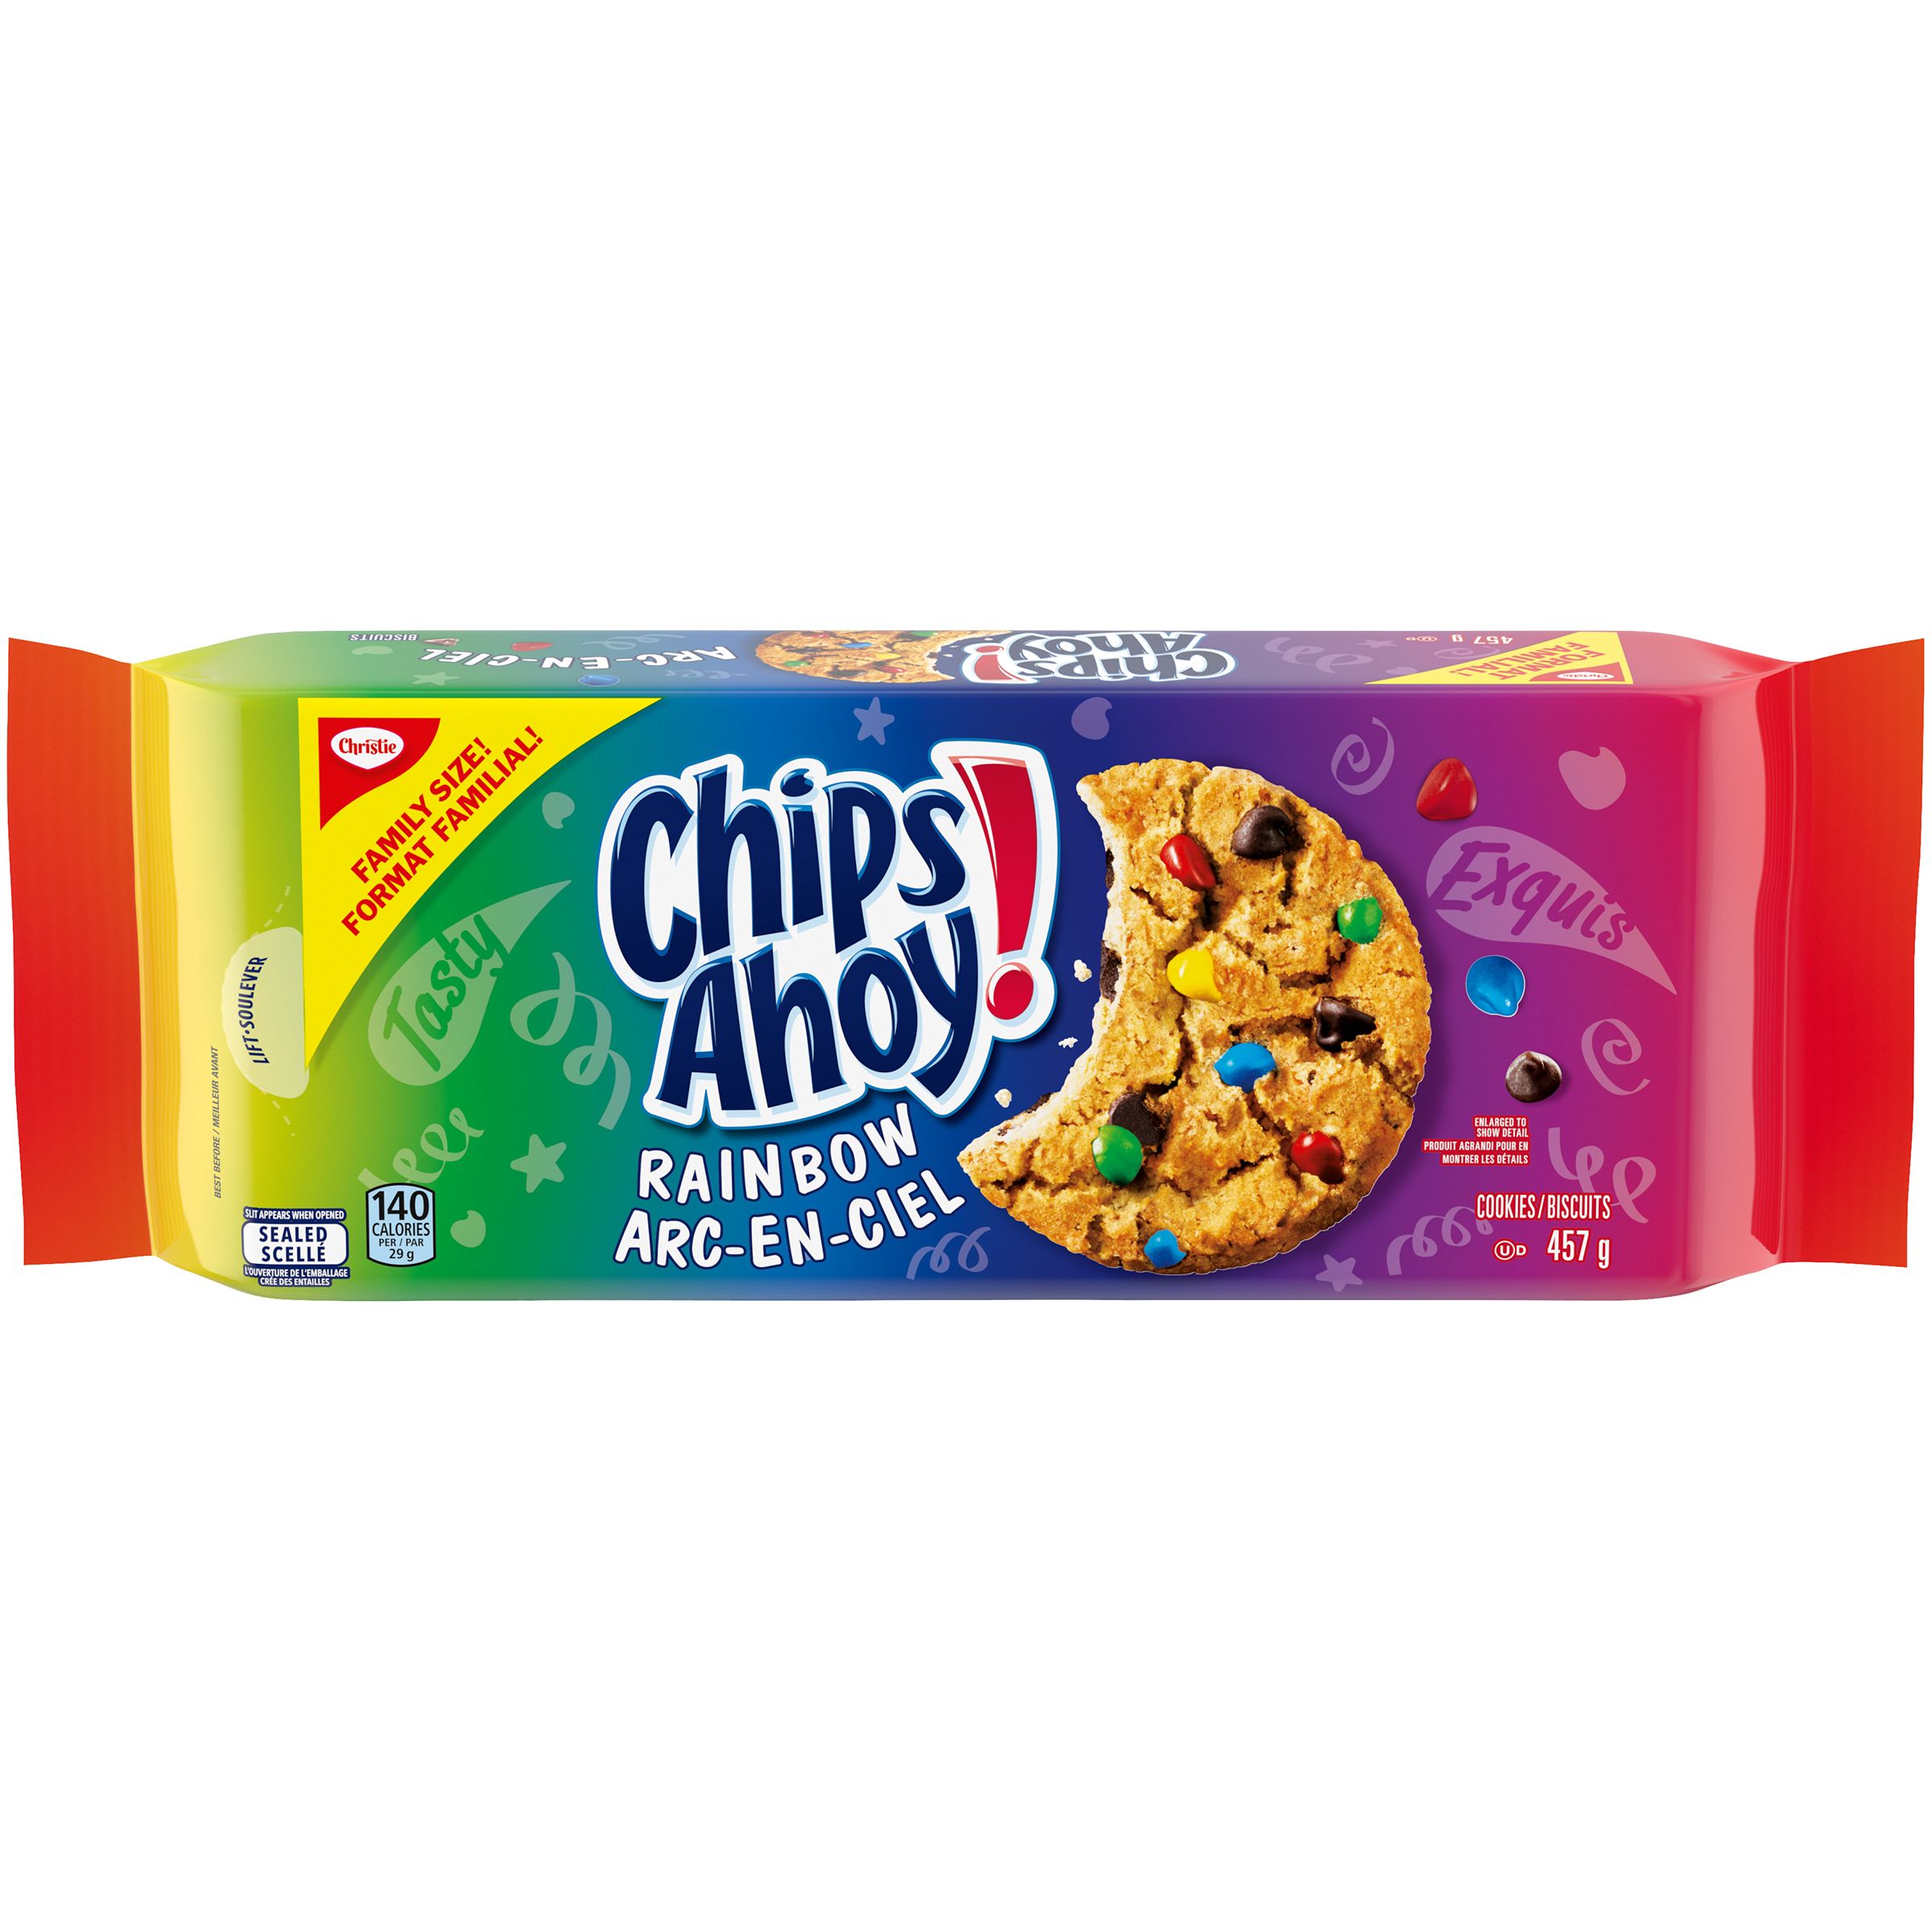 CHIPS AHOY! Rainbow Chocolate Chip Cookies, 1 Family Resealable Pack (457g)-0